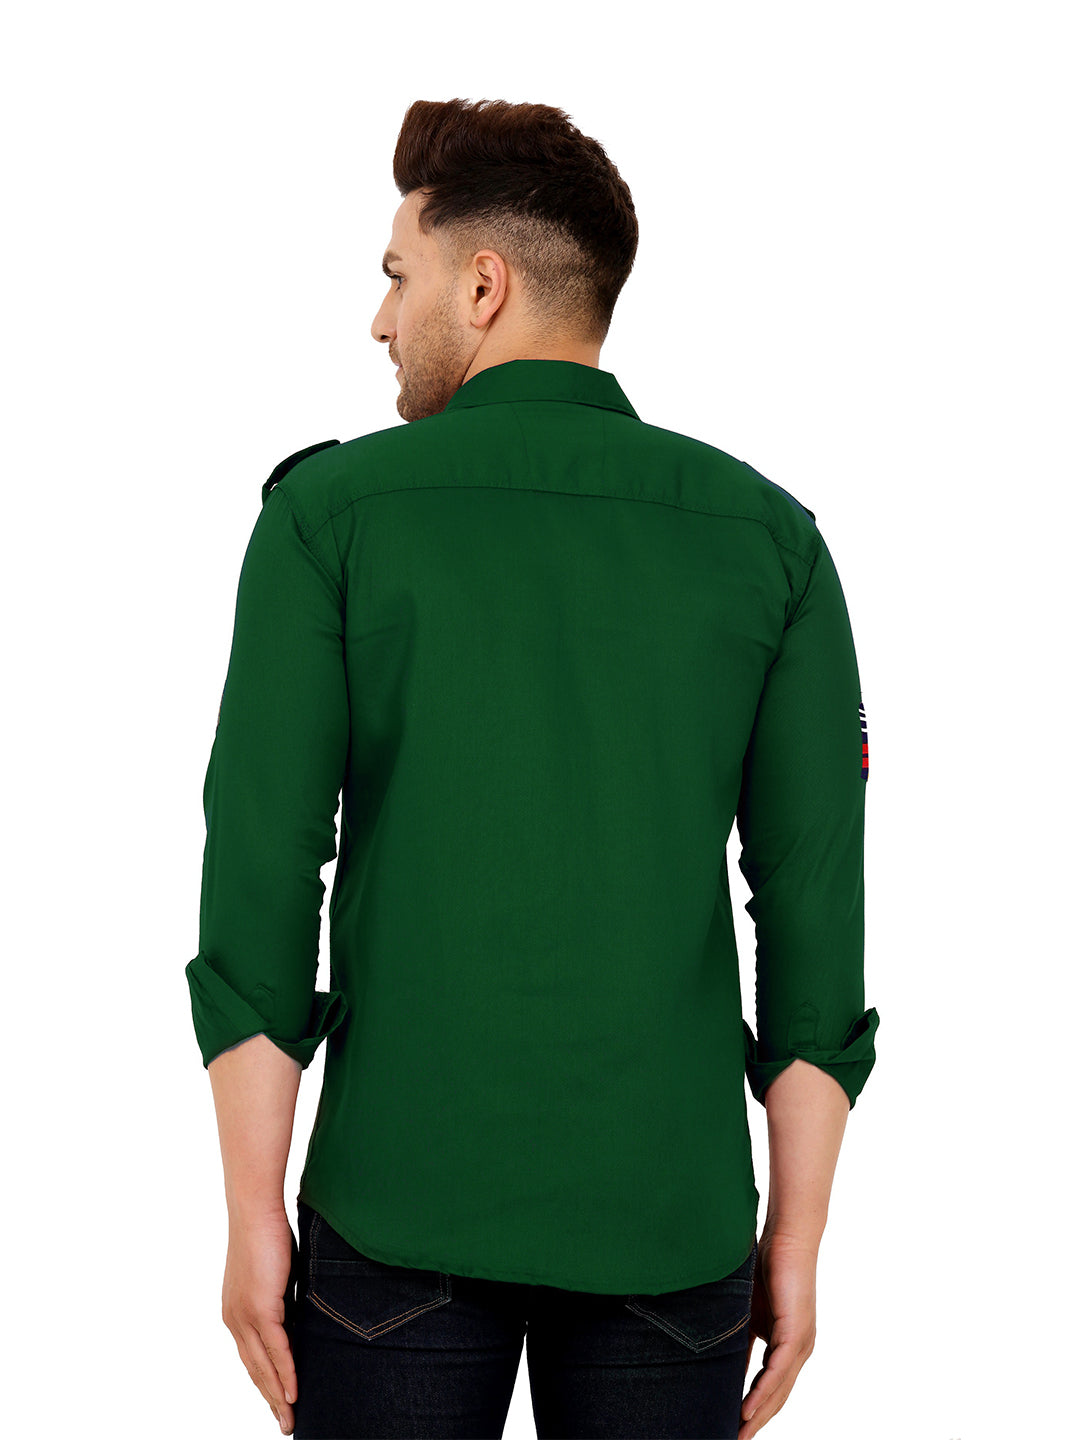 Men's Stylish Cotton Casual Shirt | Affordable and Trendy Fashion ( Green )